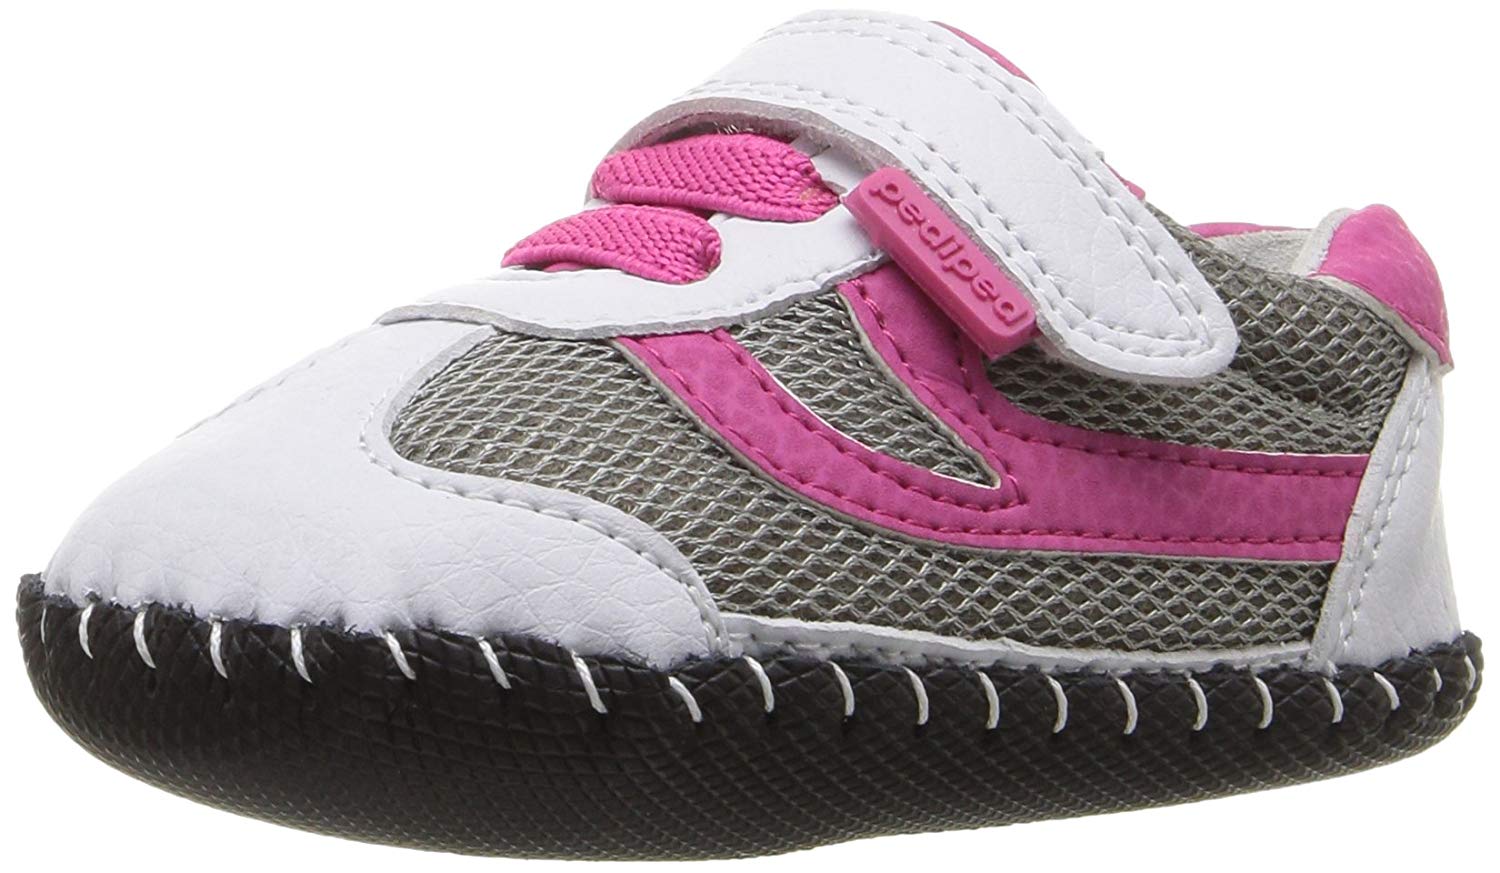 pediped Children Girls Athletic Shoes in White Color, Size 0 XIS ...